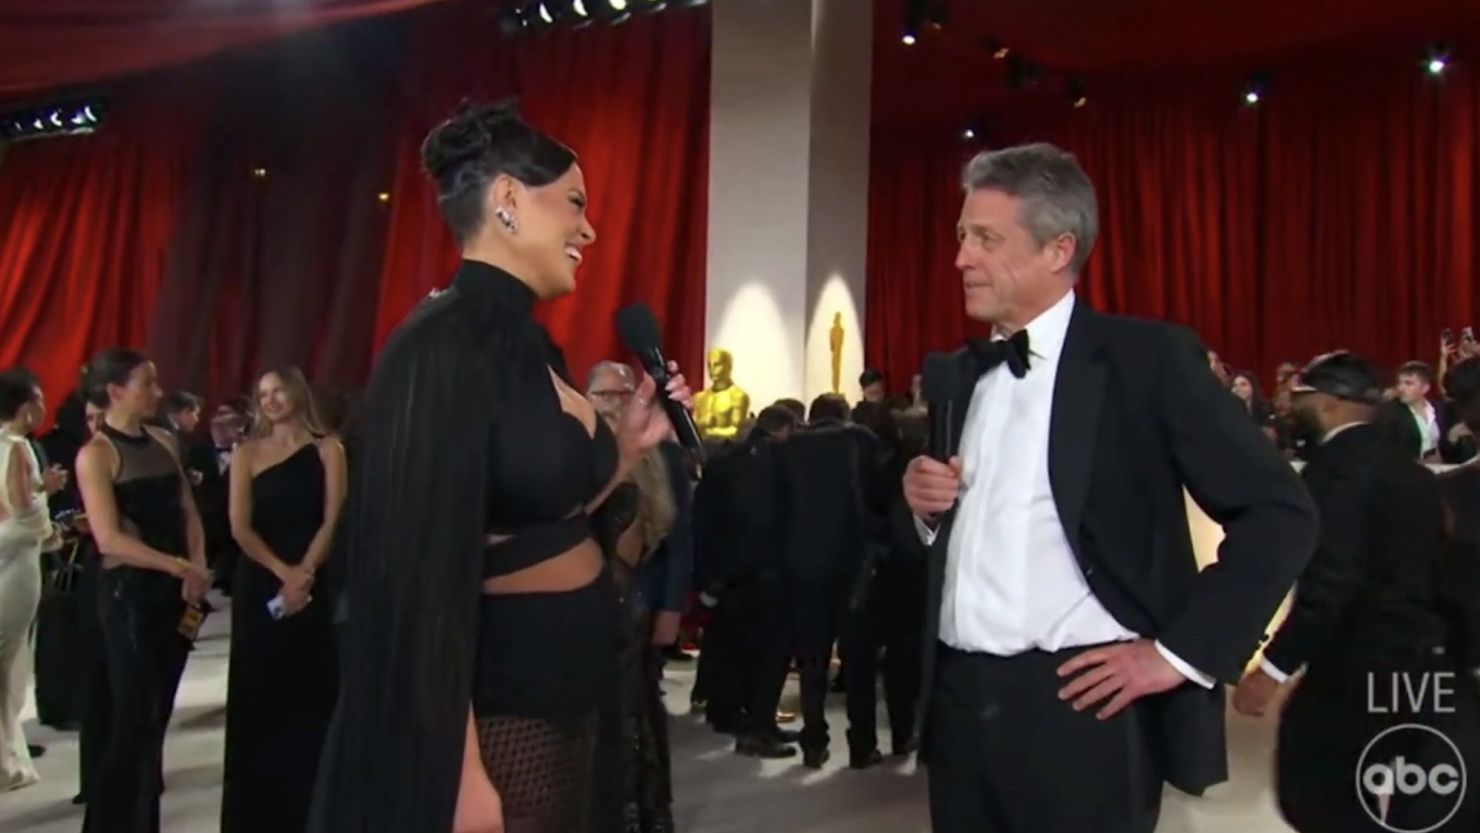 Hugh Grant is interviewed on the red carpet by Ashley Graham in a video that went viral from the 2023 Oscars.